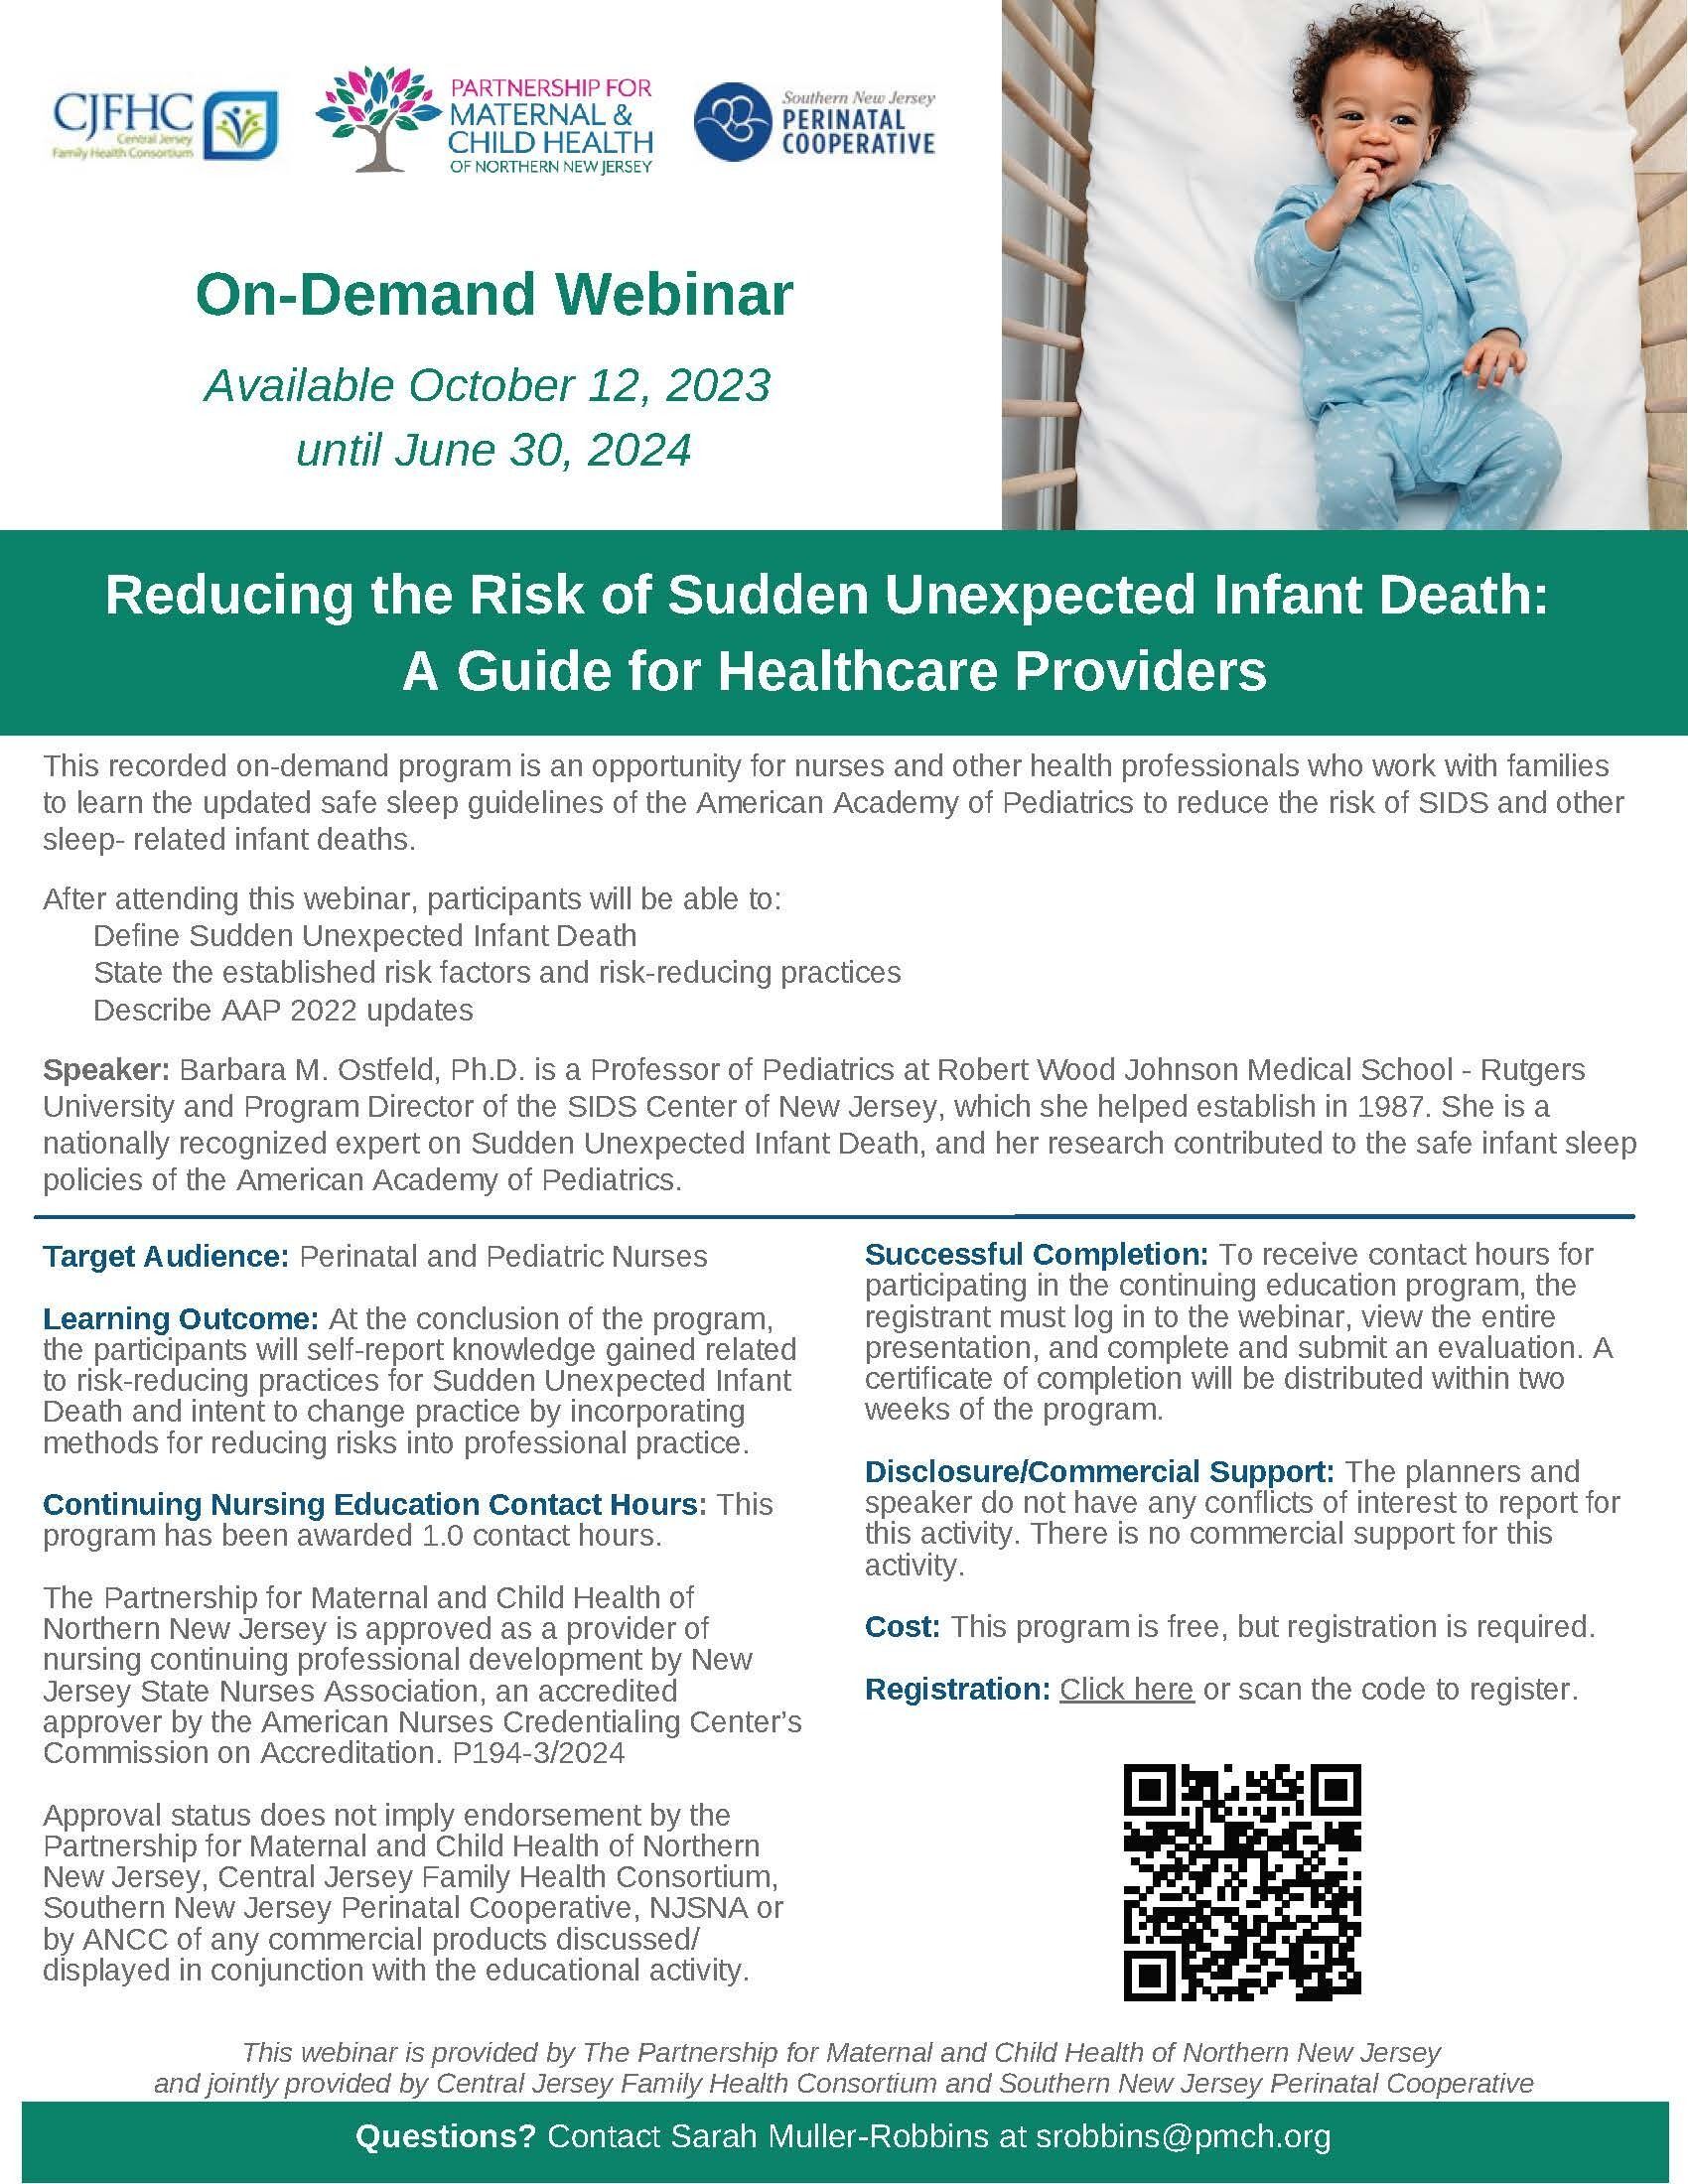 On-demand webinar: "Reducing the Risk of Sudden Unexpected Infant Death: A Guide for Healthcare Providers."